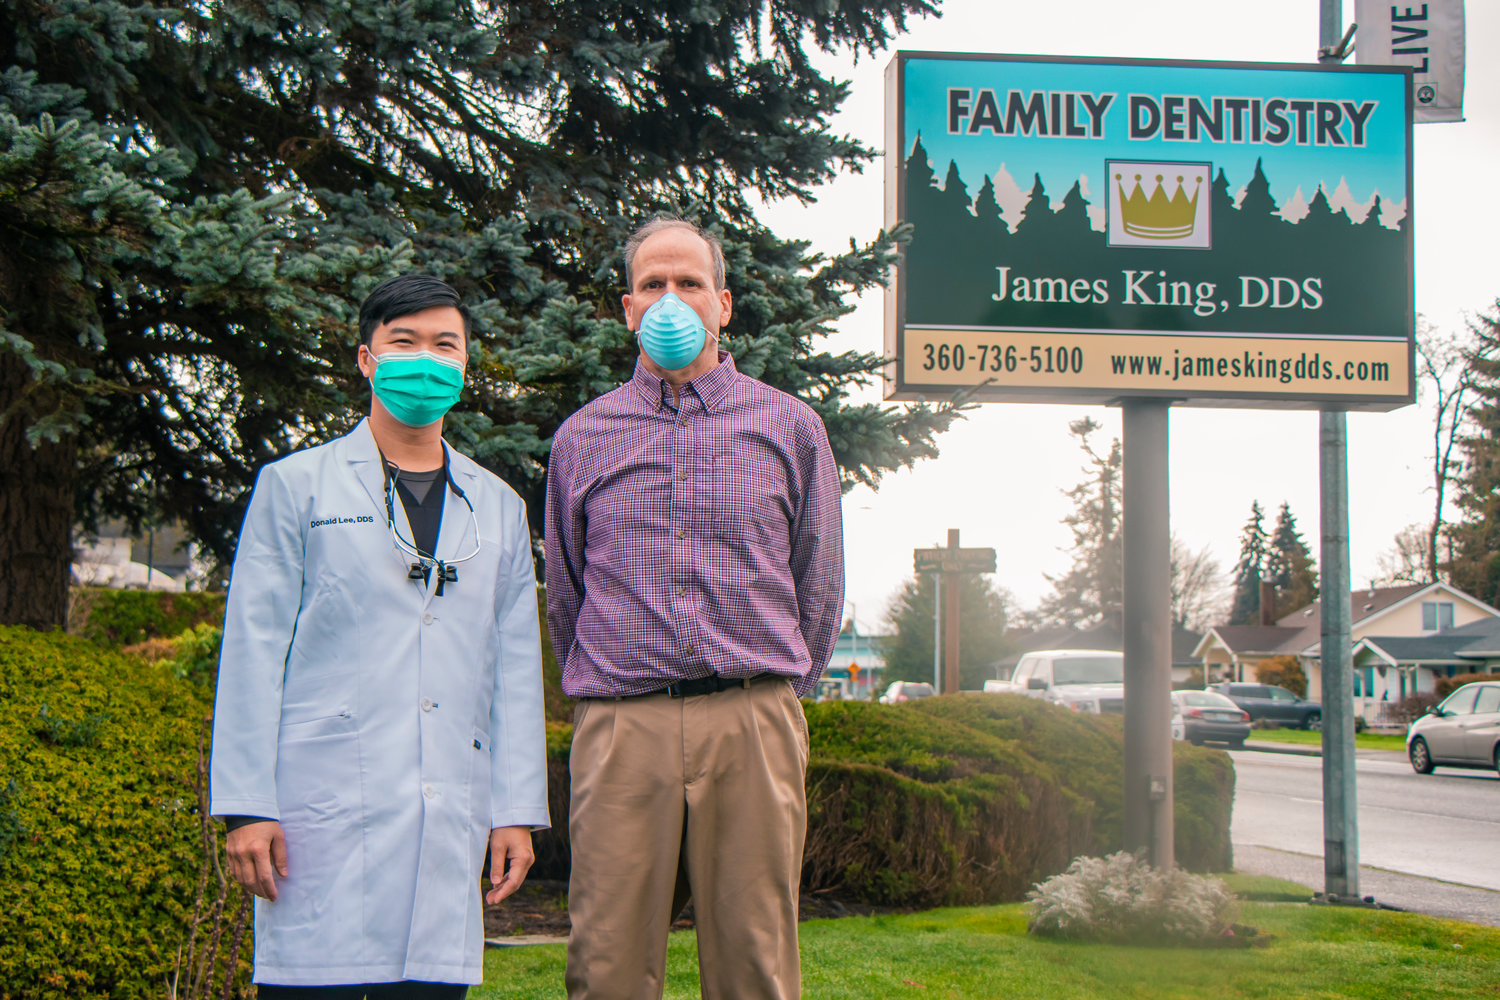 Donald Lee, DDS, left, and James King, DDS, pose for a photo outside the dentistry office in Centralia on Thursday.